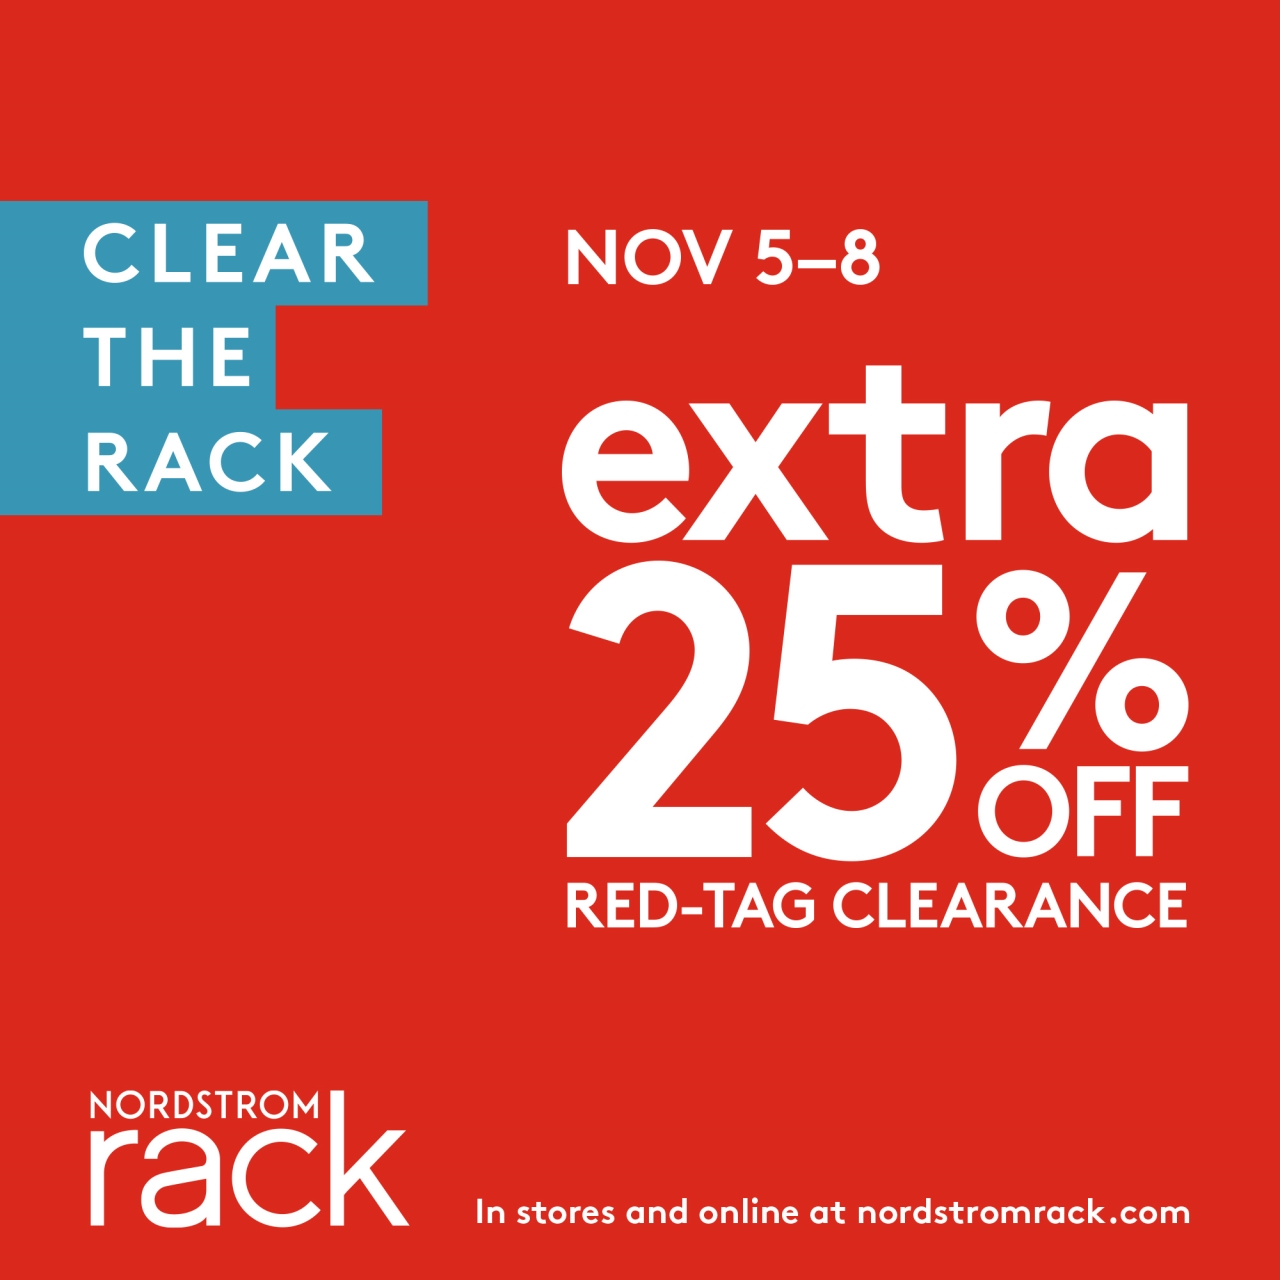 Nordstrom Rack Clear the Rack Sale TV Spot, 'Extra 25% Off Clearance' 